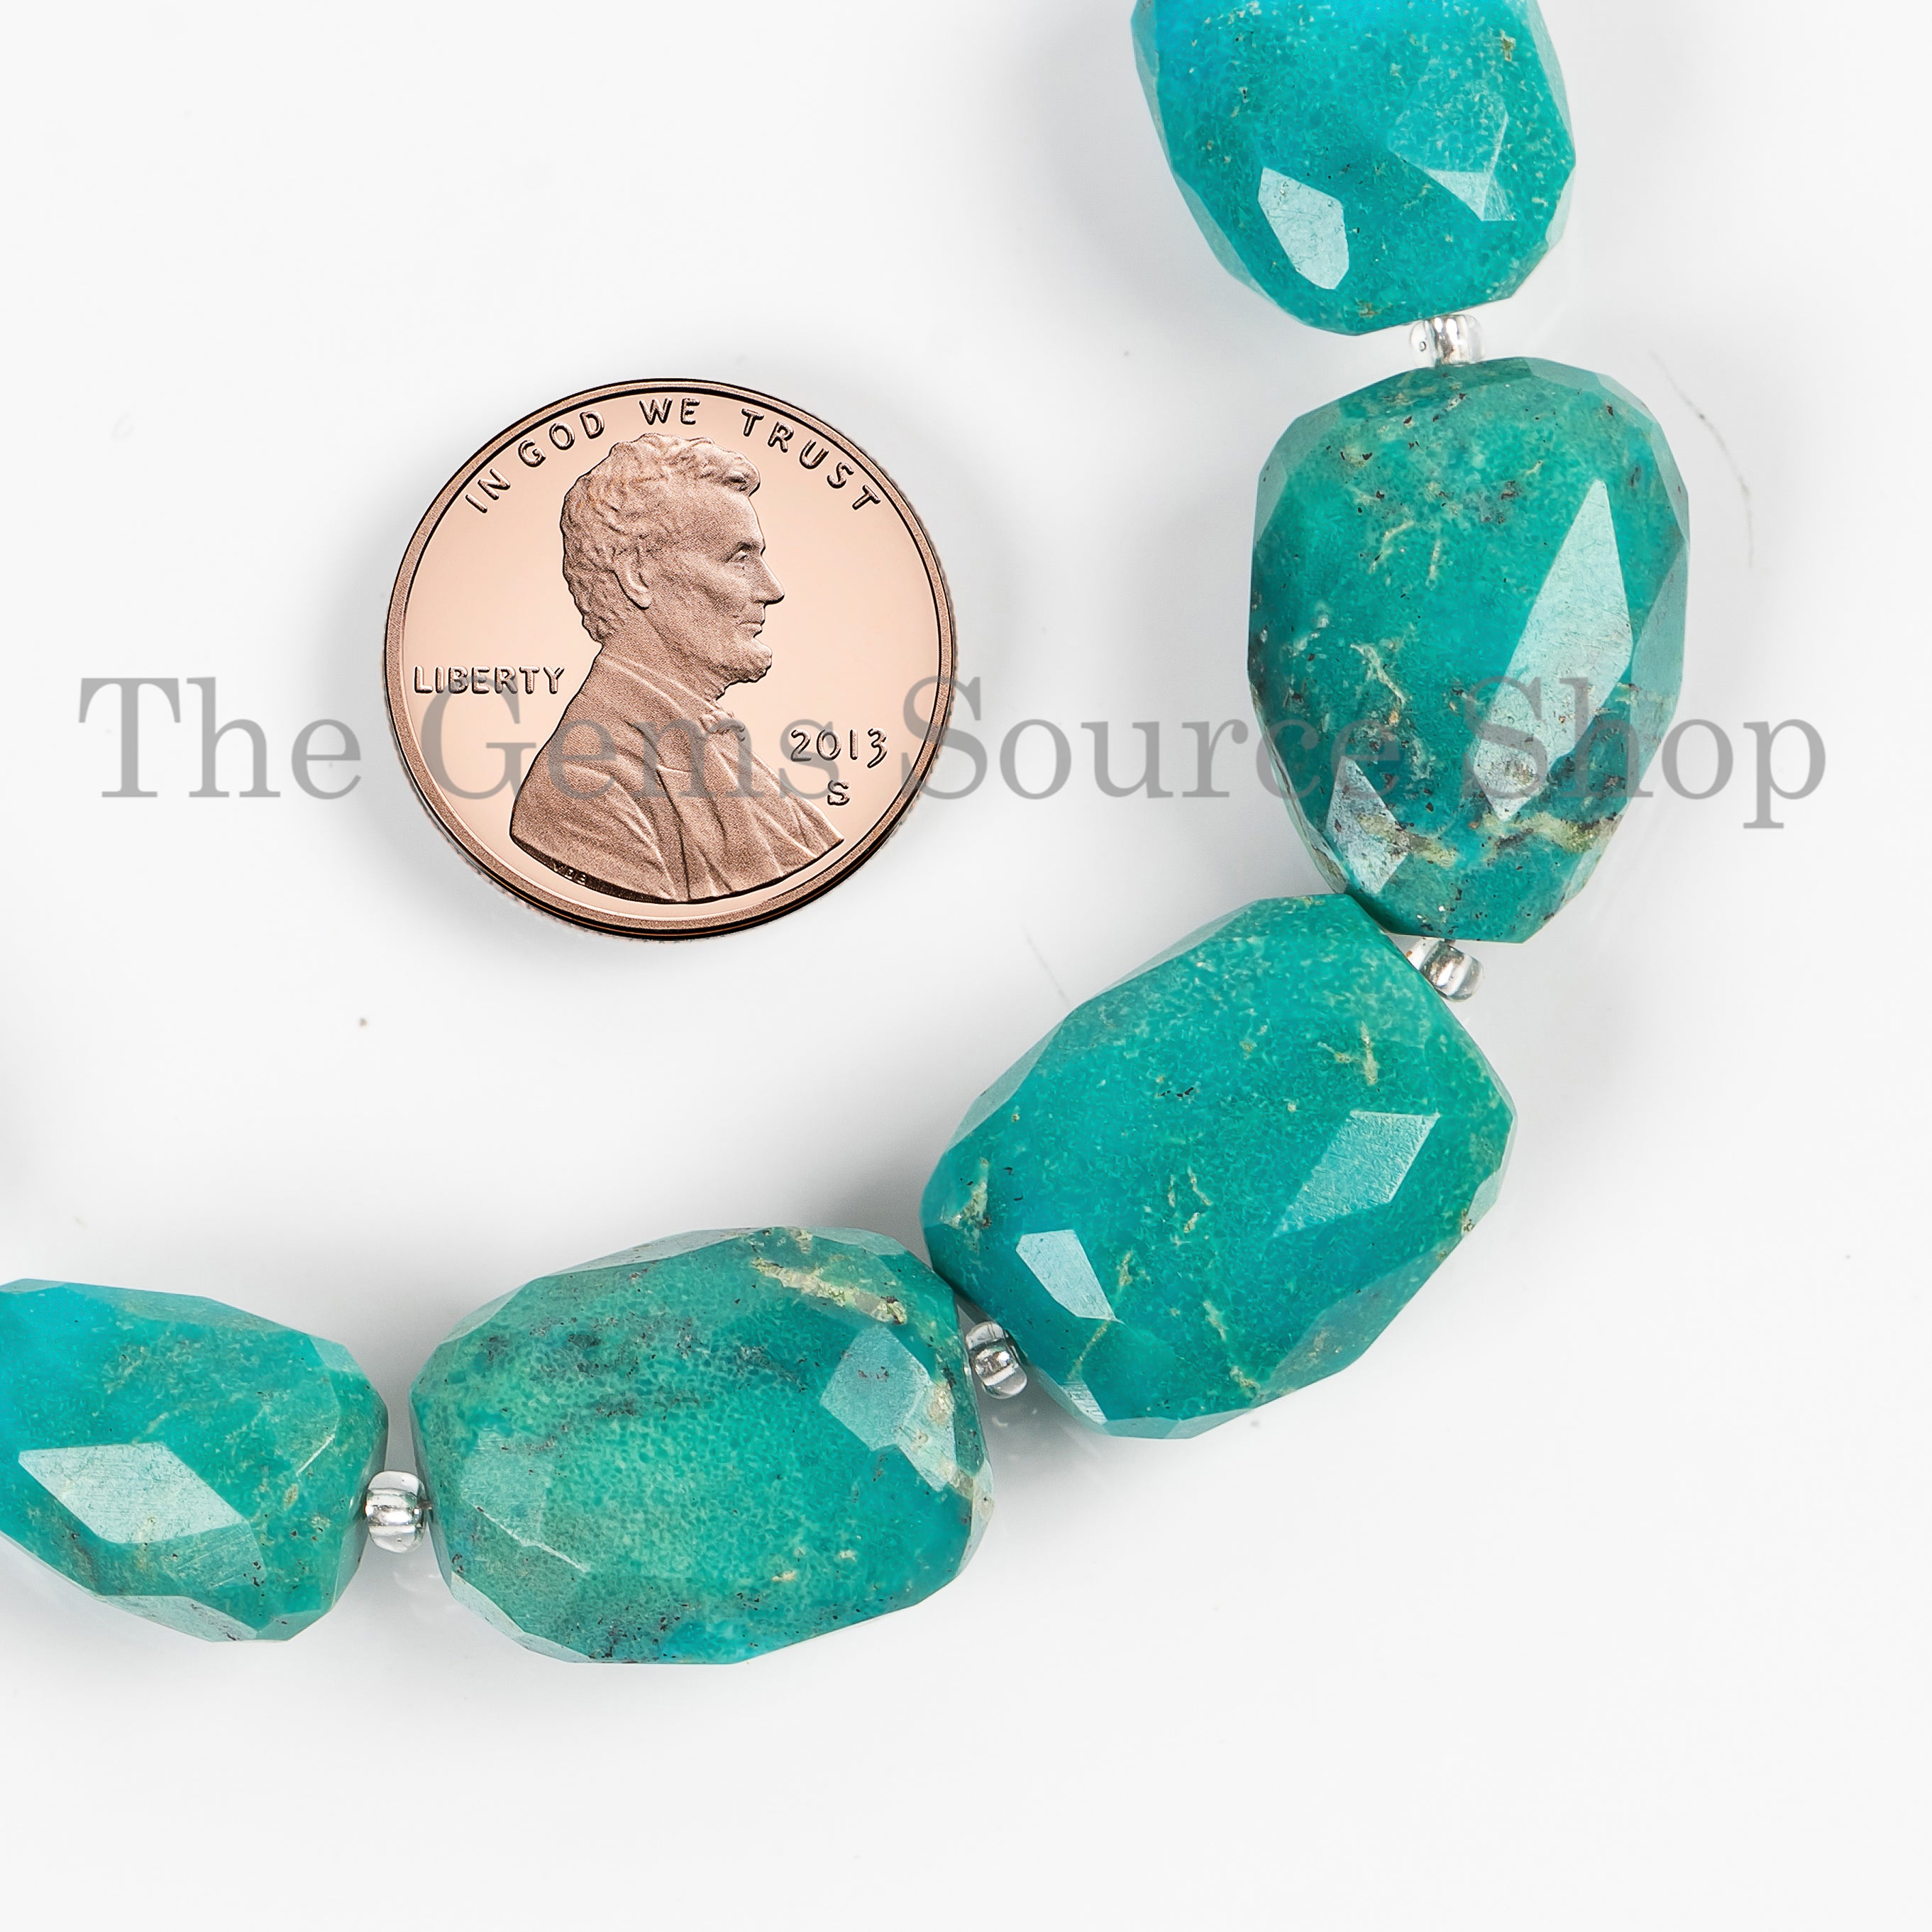 Natural Arizona Turquoise Beads, Turquoise Faceted Beads, Turquoise Nugget Shape